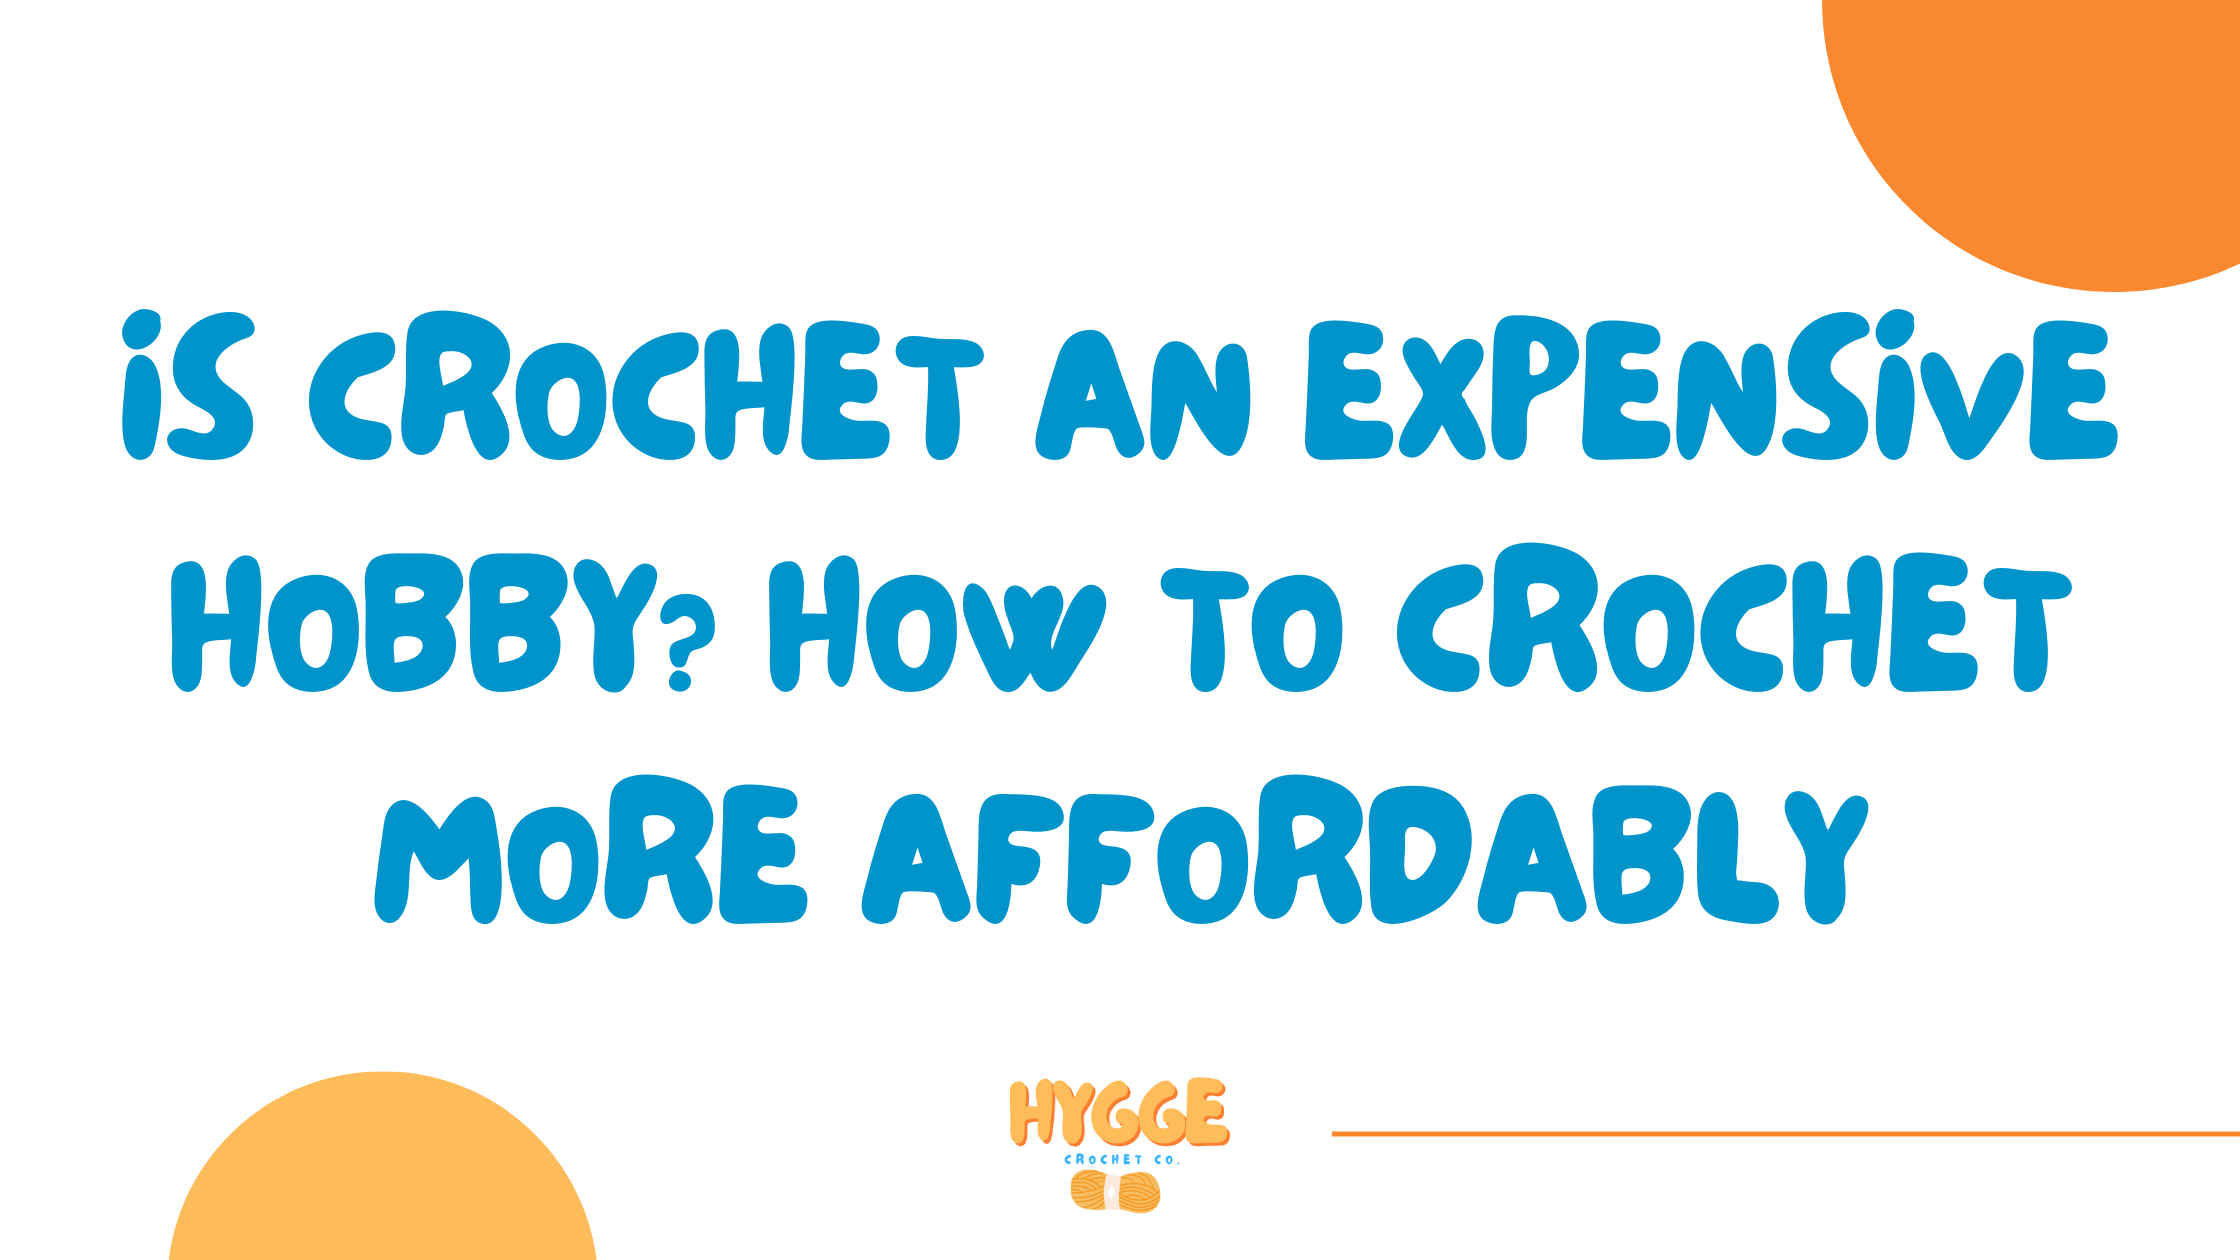 Is Crochet An Expensive Hobby? How to Crochet More Affordably